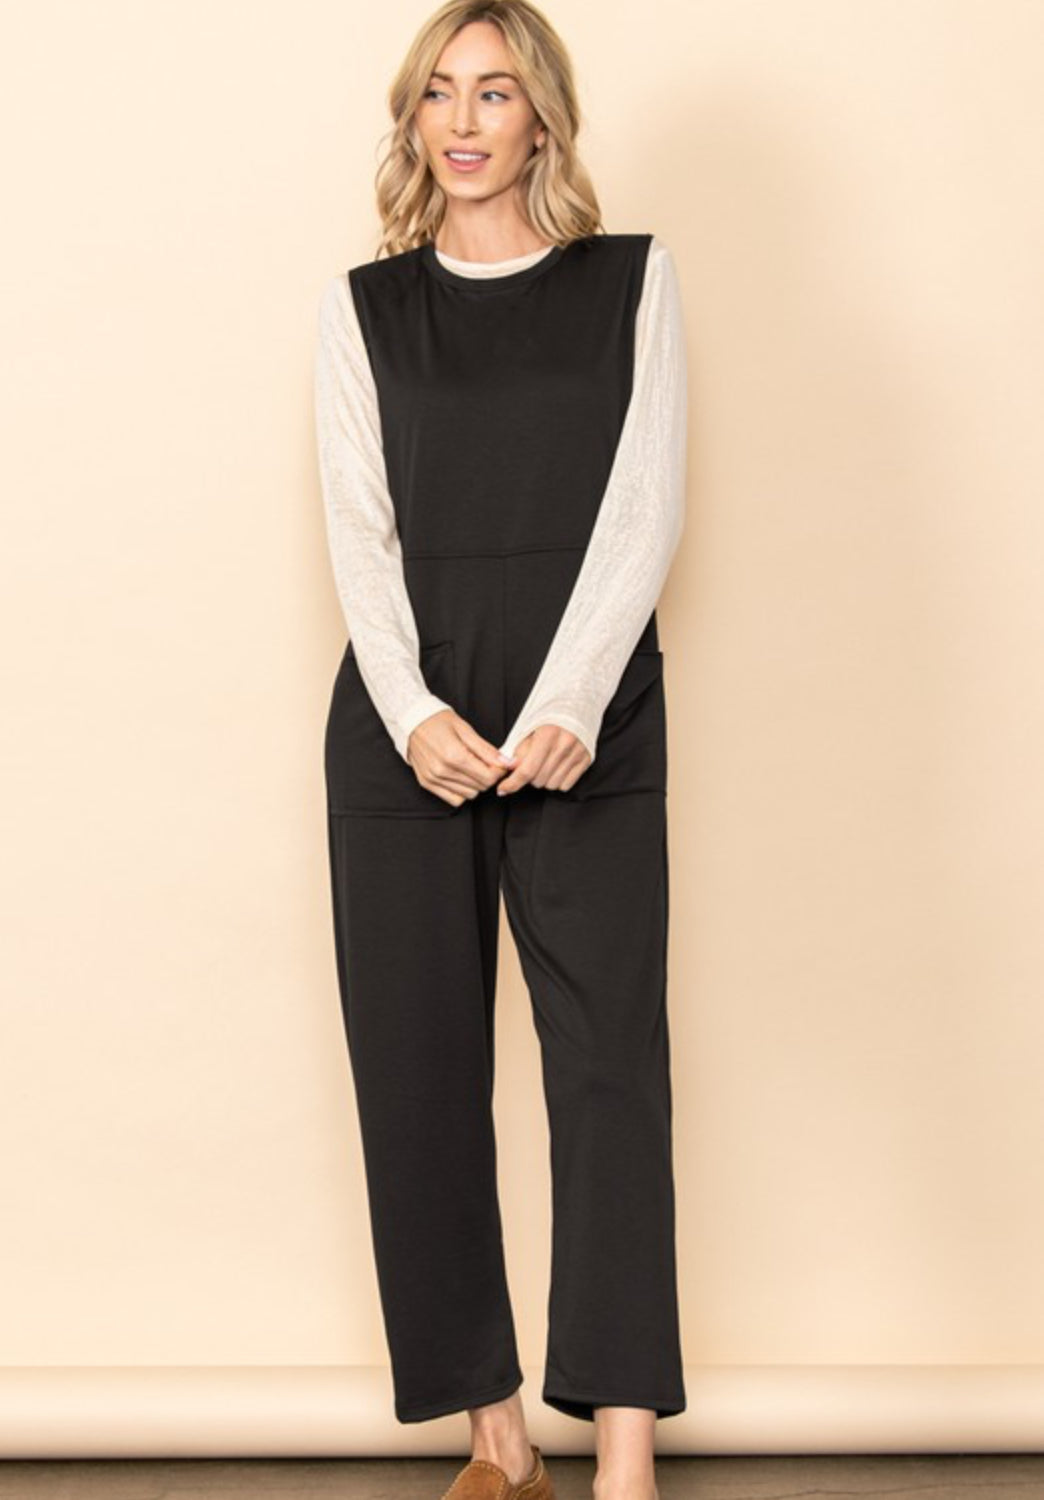 French Terry Jemper Jumpsuit